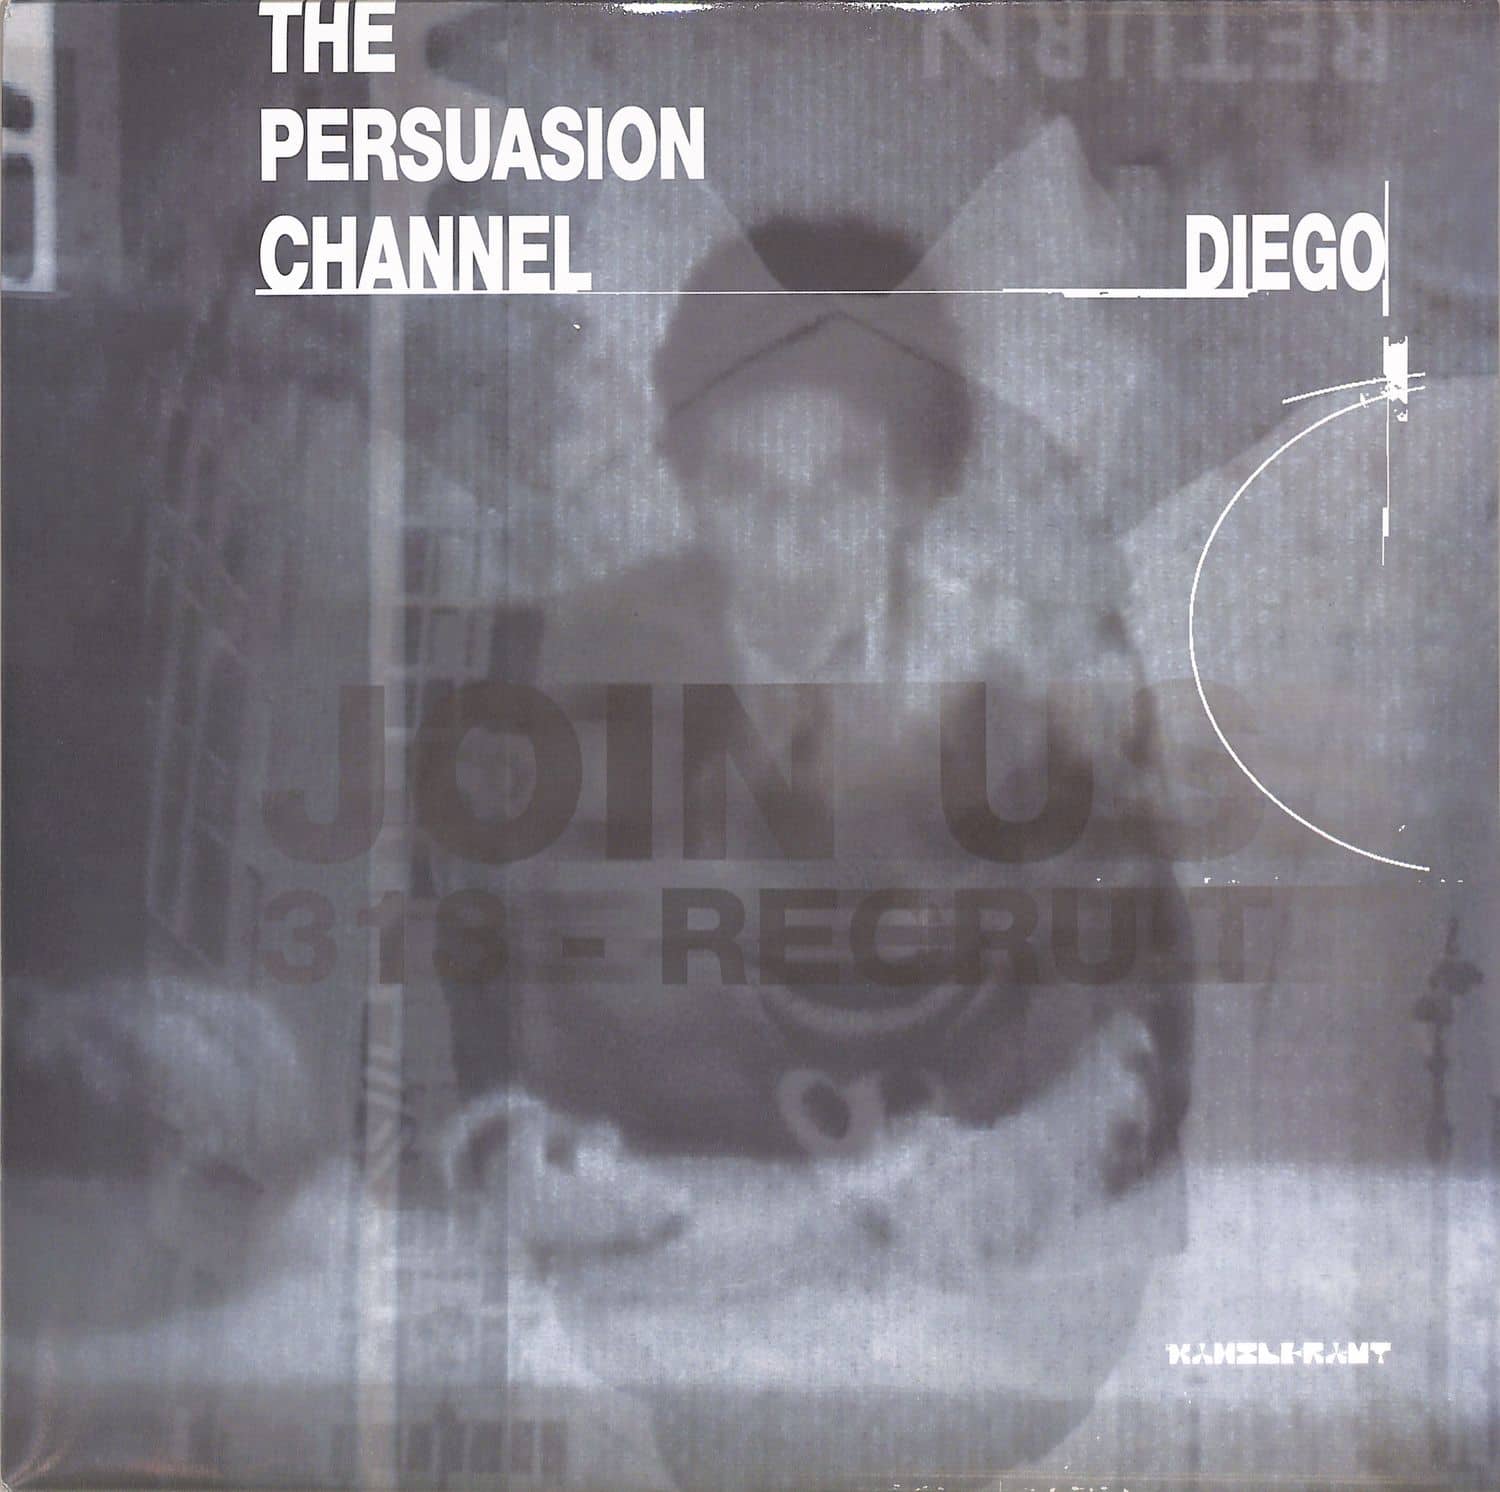 Diego - THE PERSUASION CHANNEL 